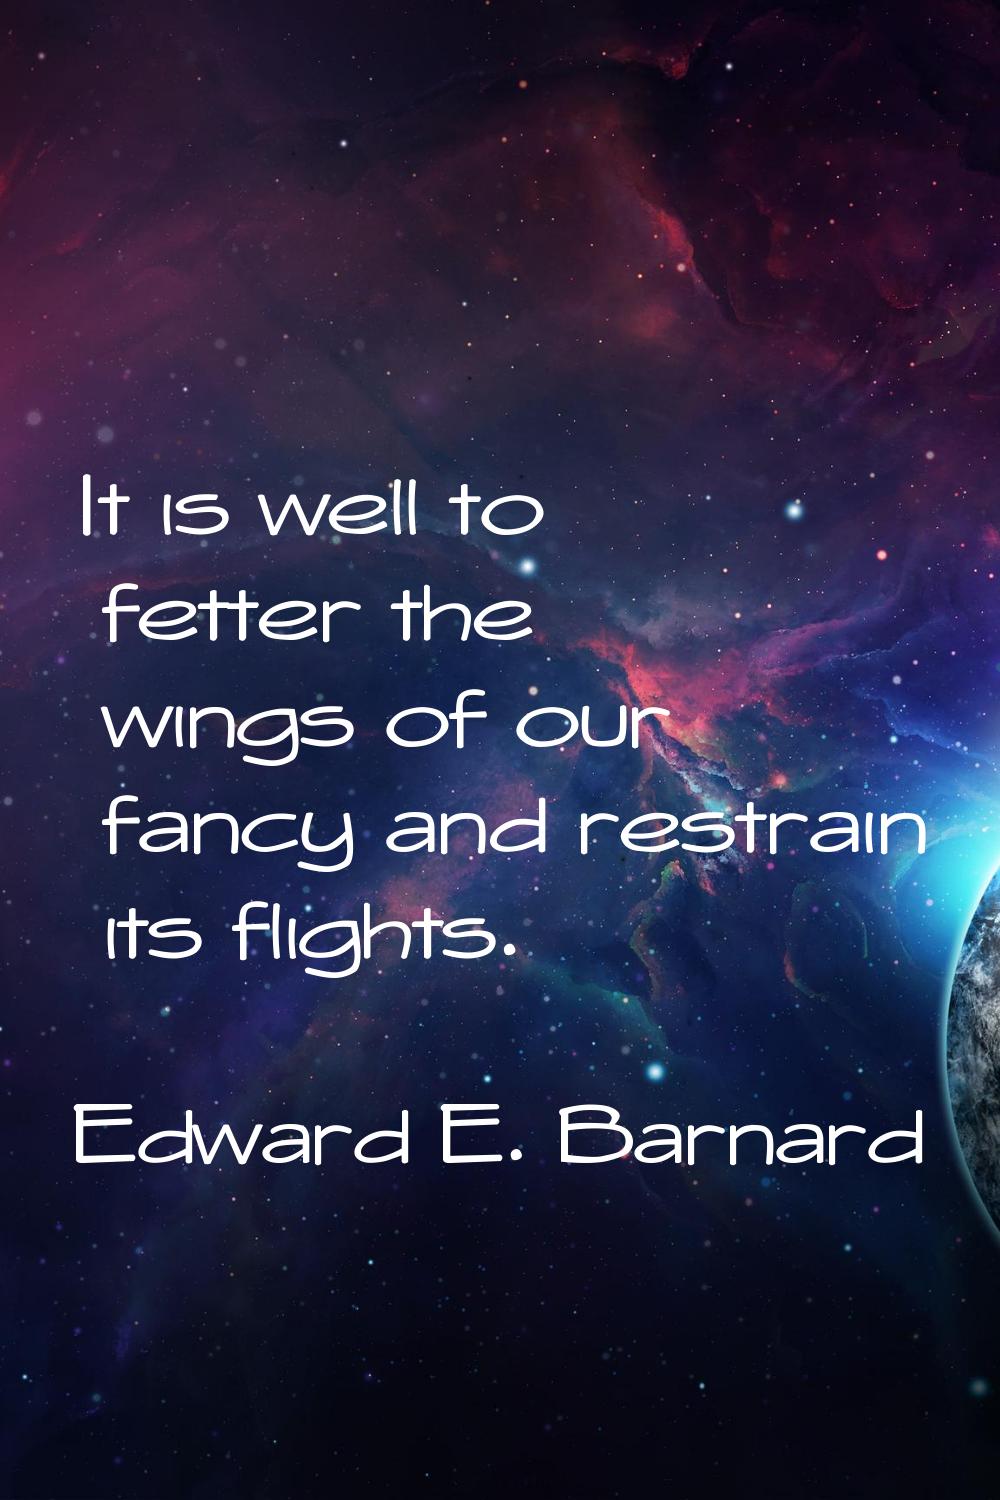 It is well to fetter the wings of our fancy and restrain its flights.